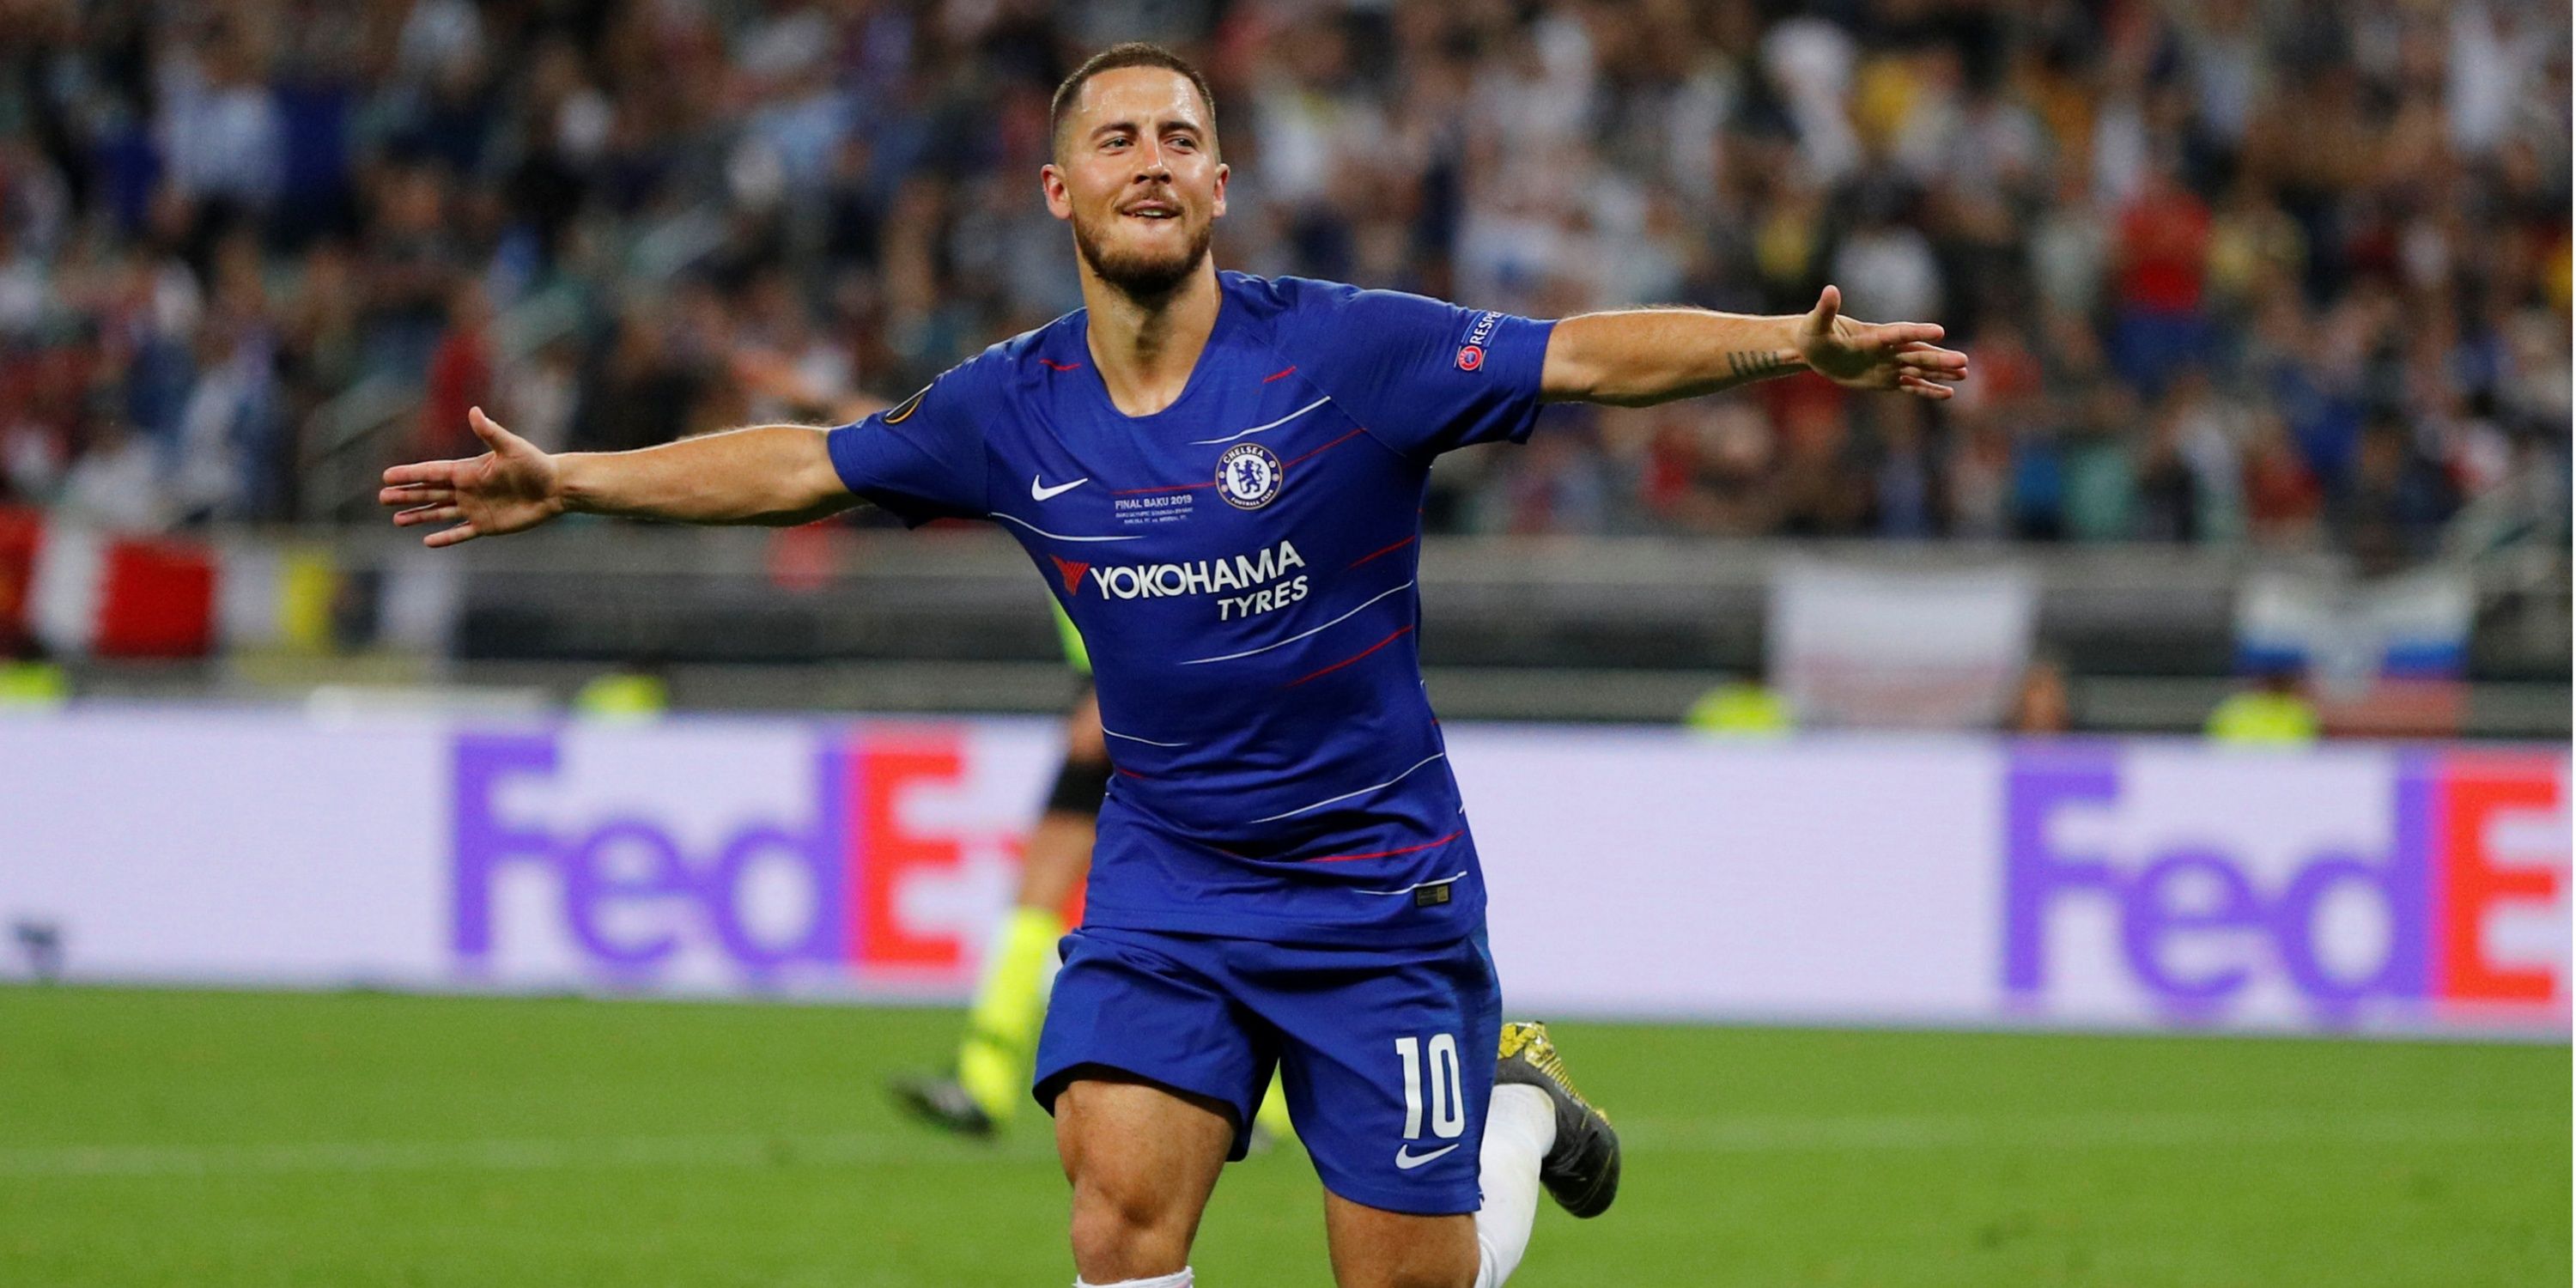 Chelsea's Eden Hazard celebrates with outstreched arms after scoring in the Europa League final against Arsenal.